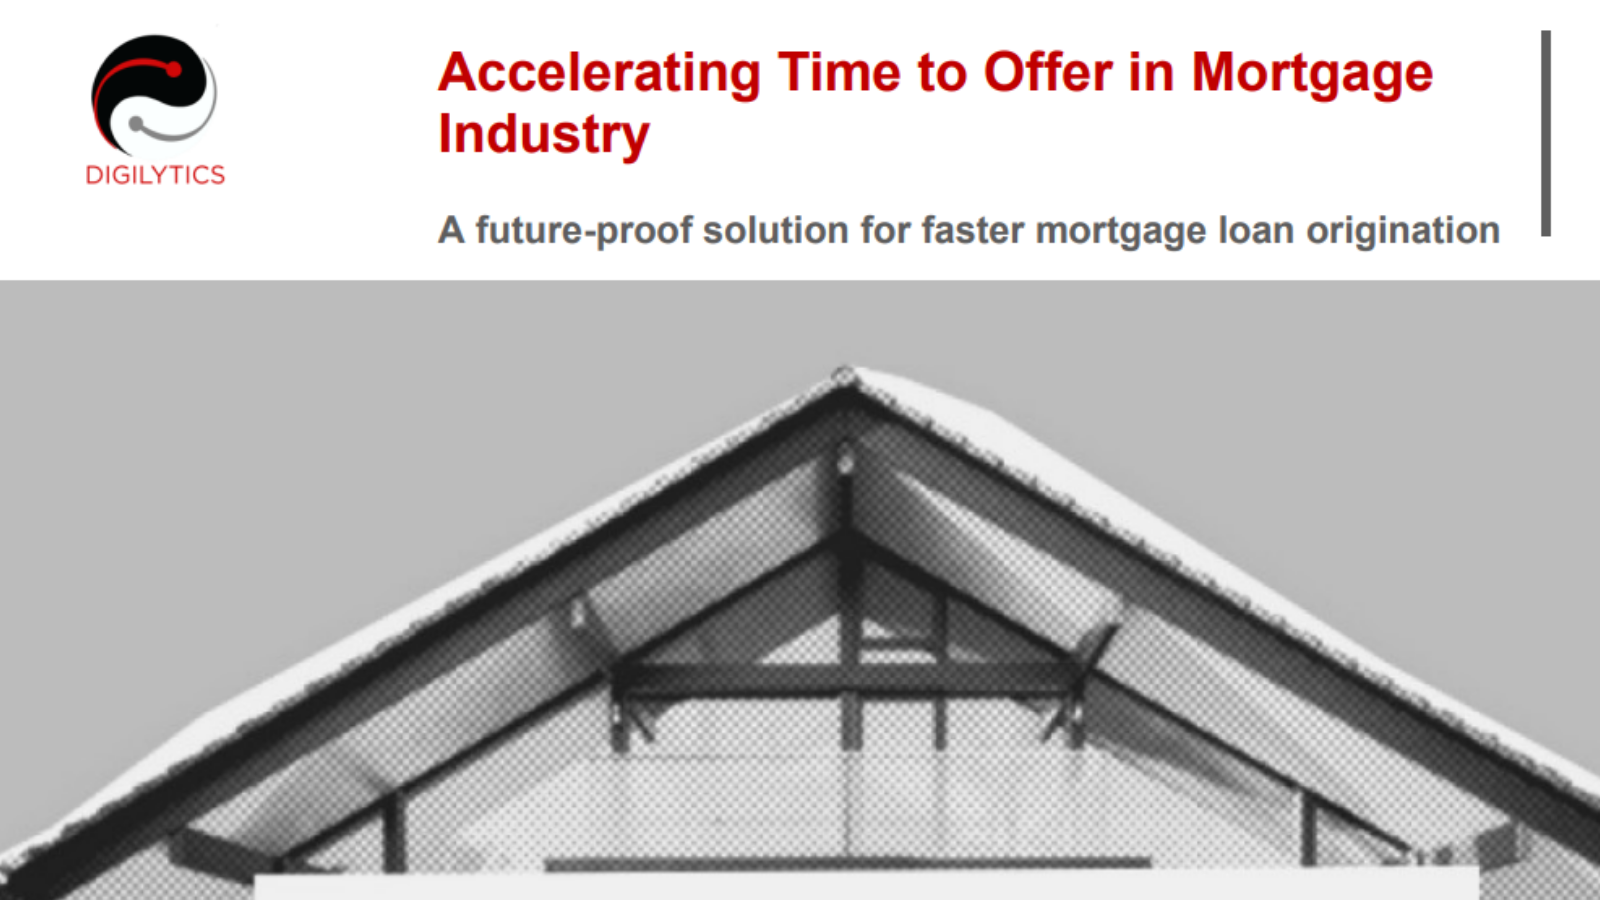 Accelerating Time to Offer in Mortgage Industry